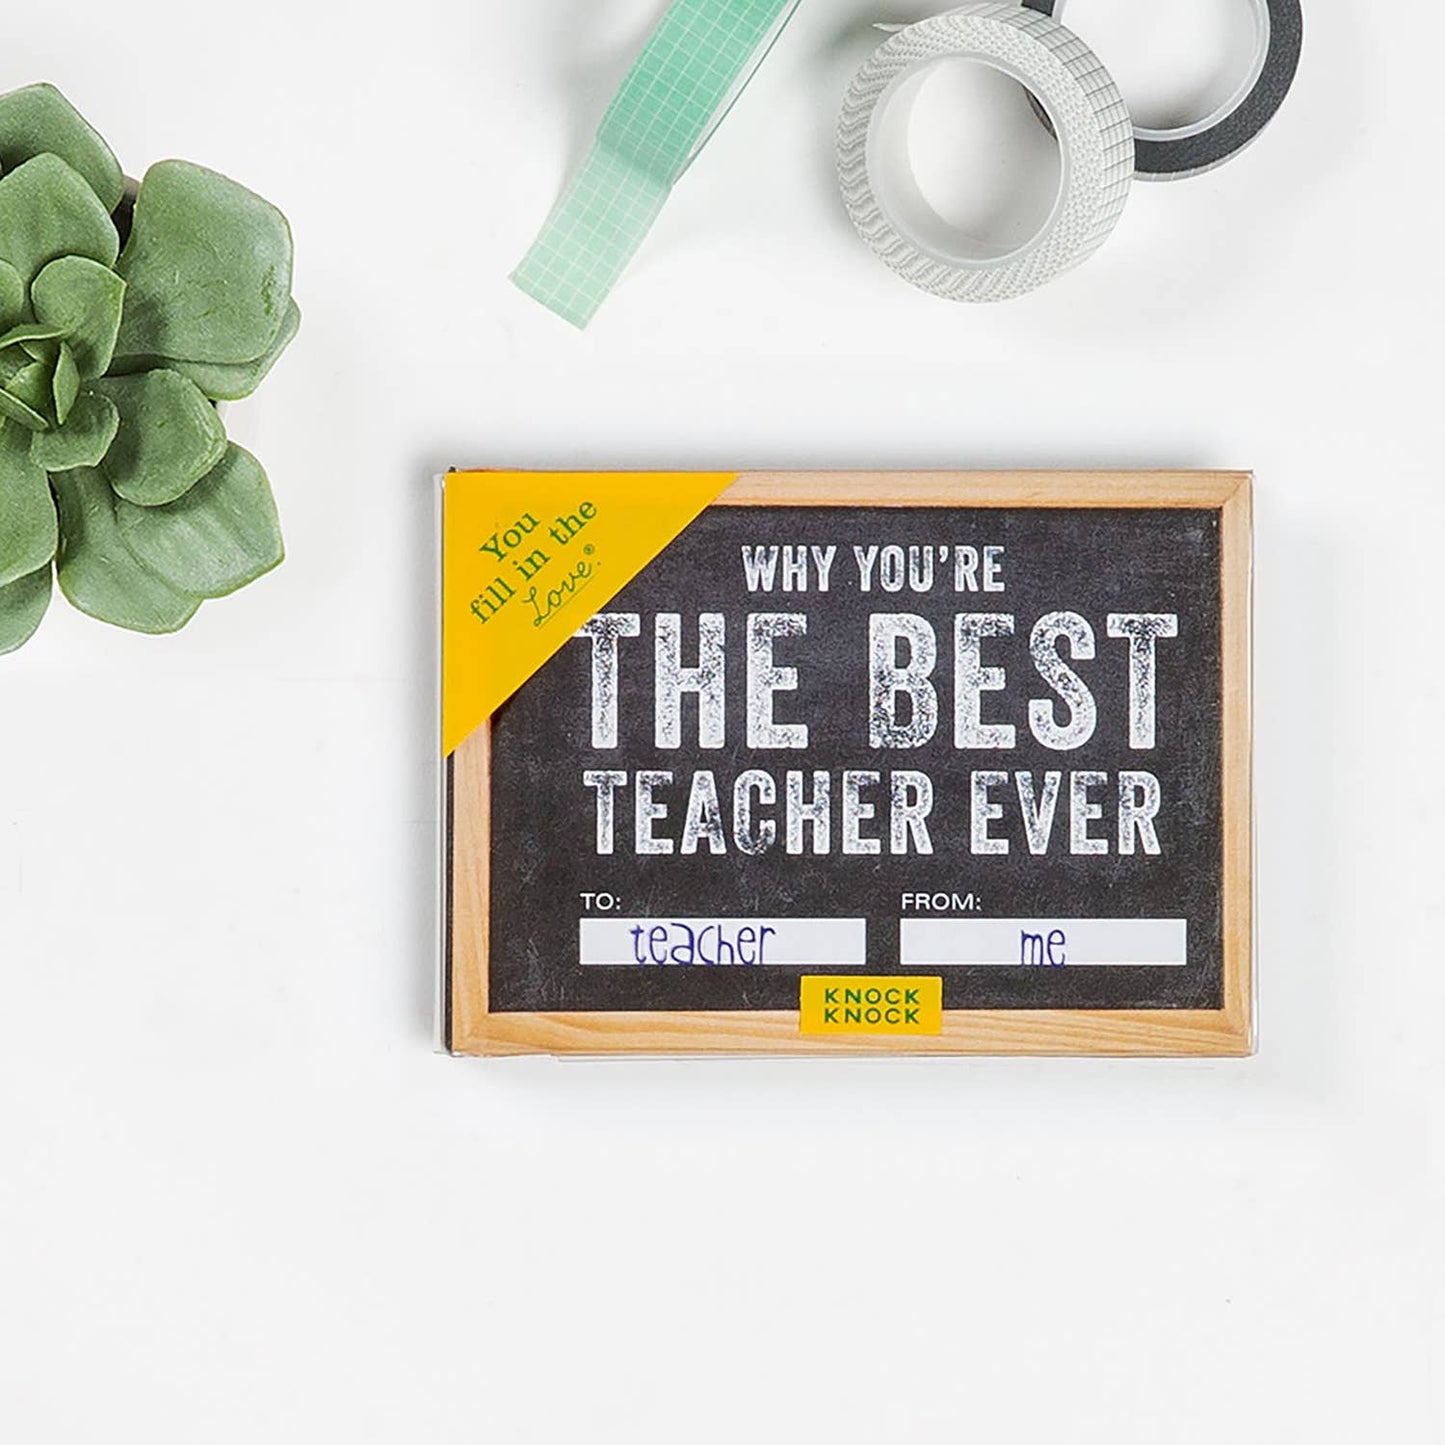 Knock Knock - Why You're the Best Teacher Ever  Fill in the Love® Book